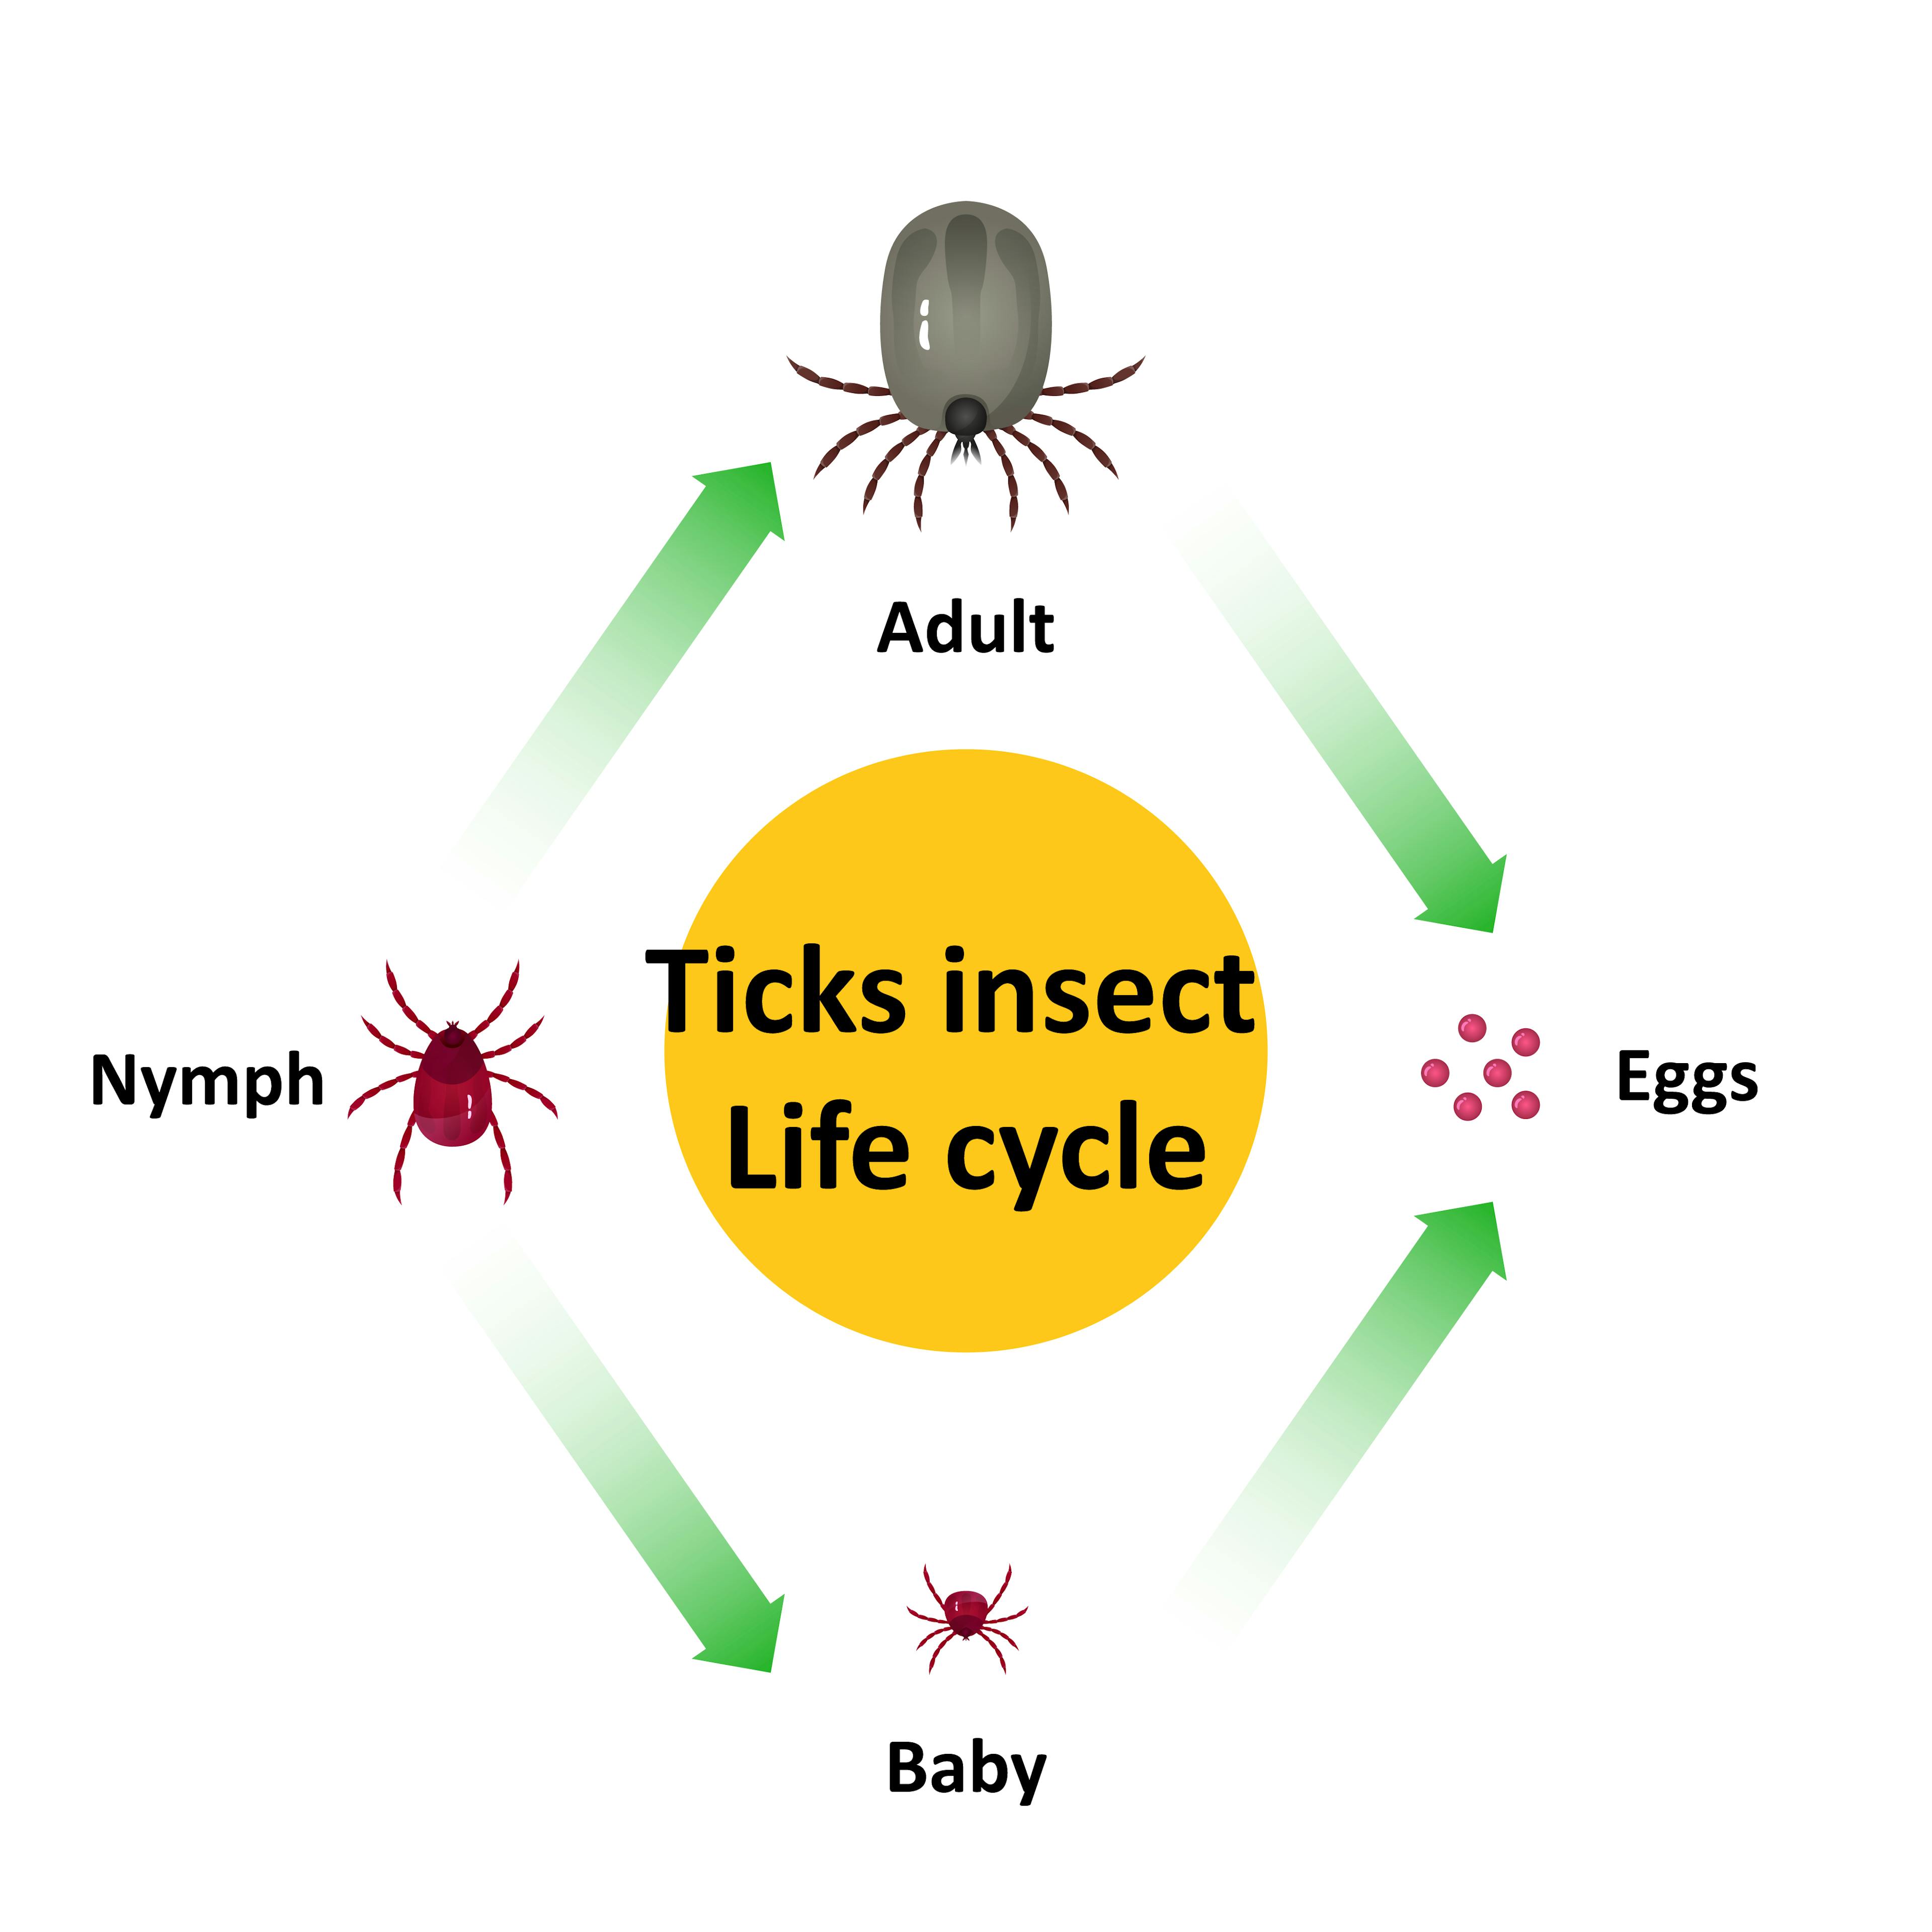 Tick insect life cycle